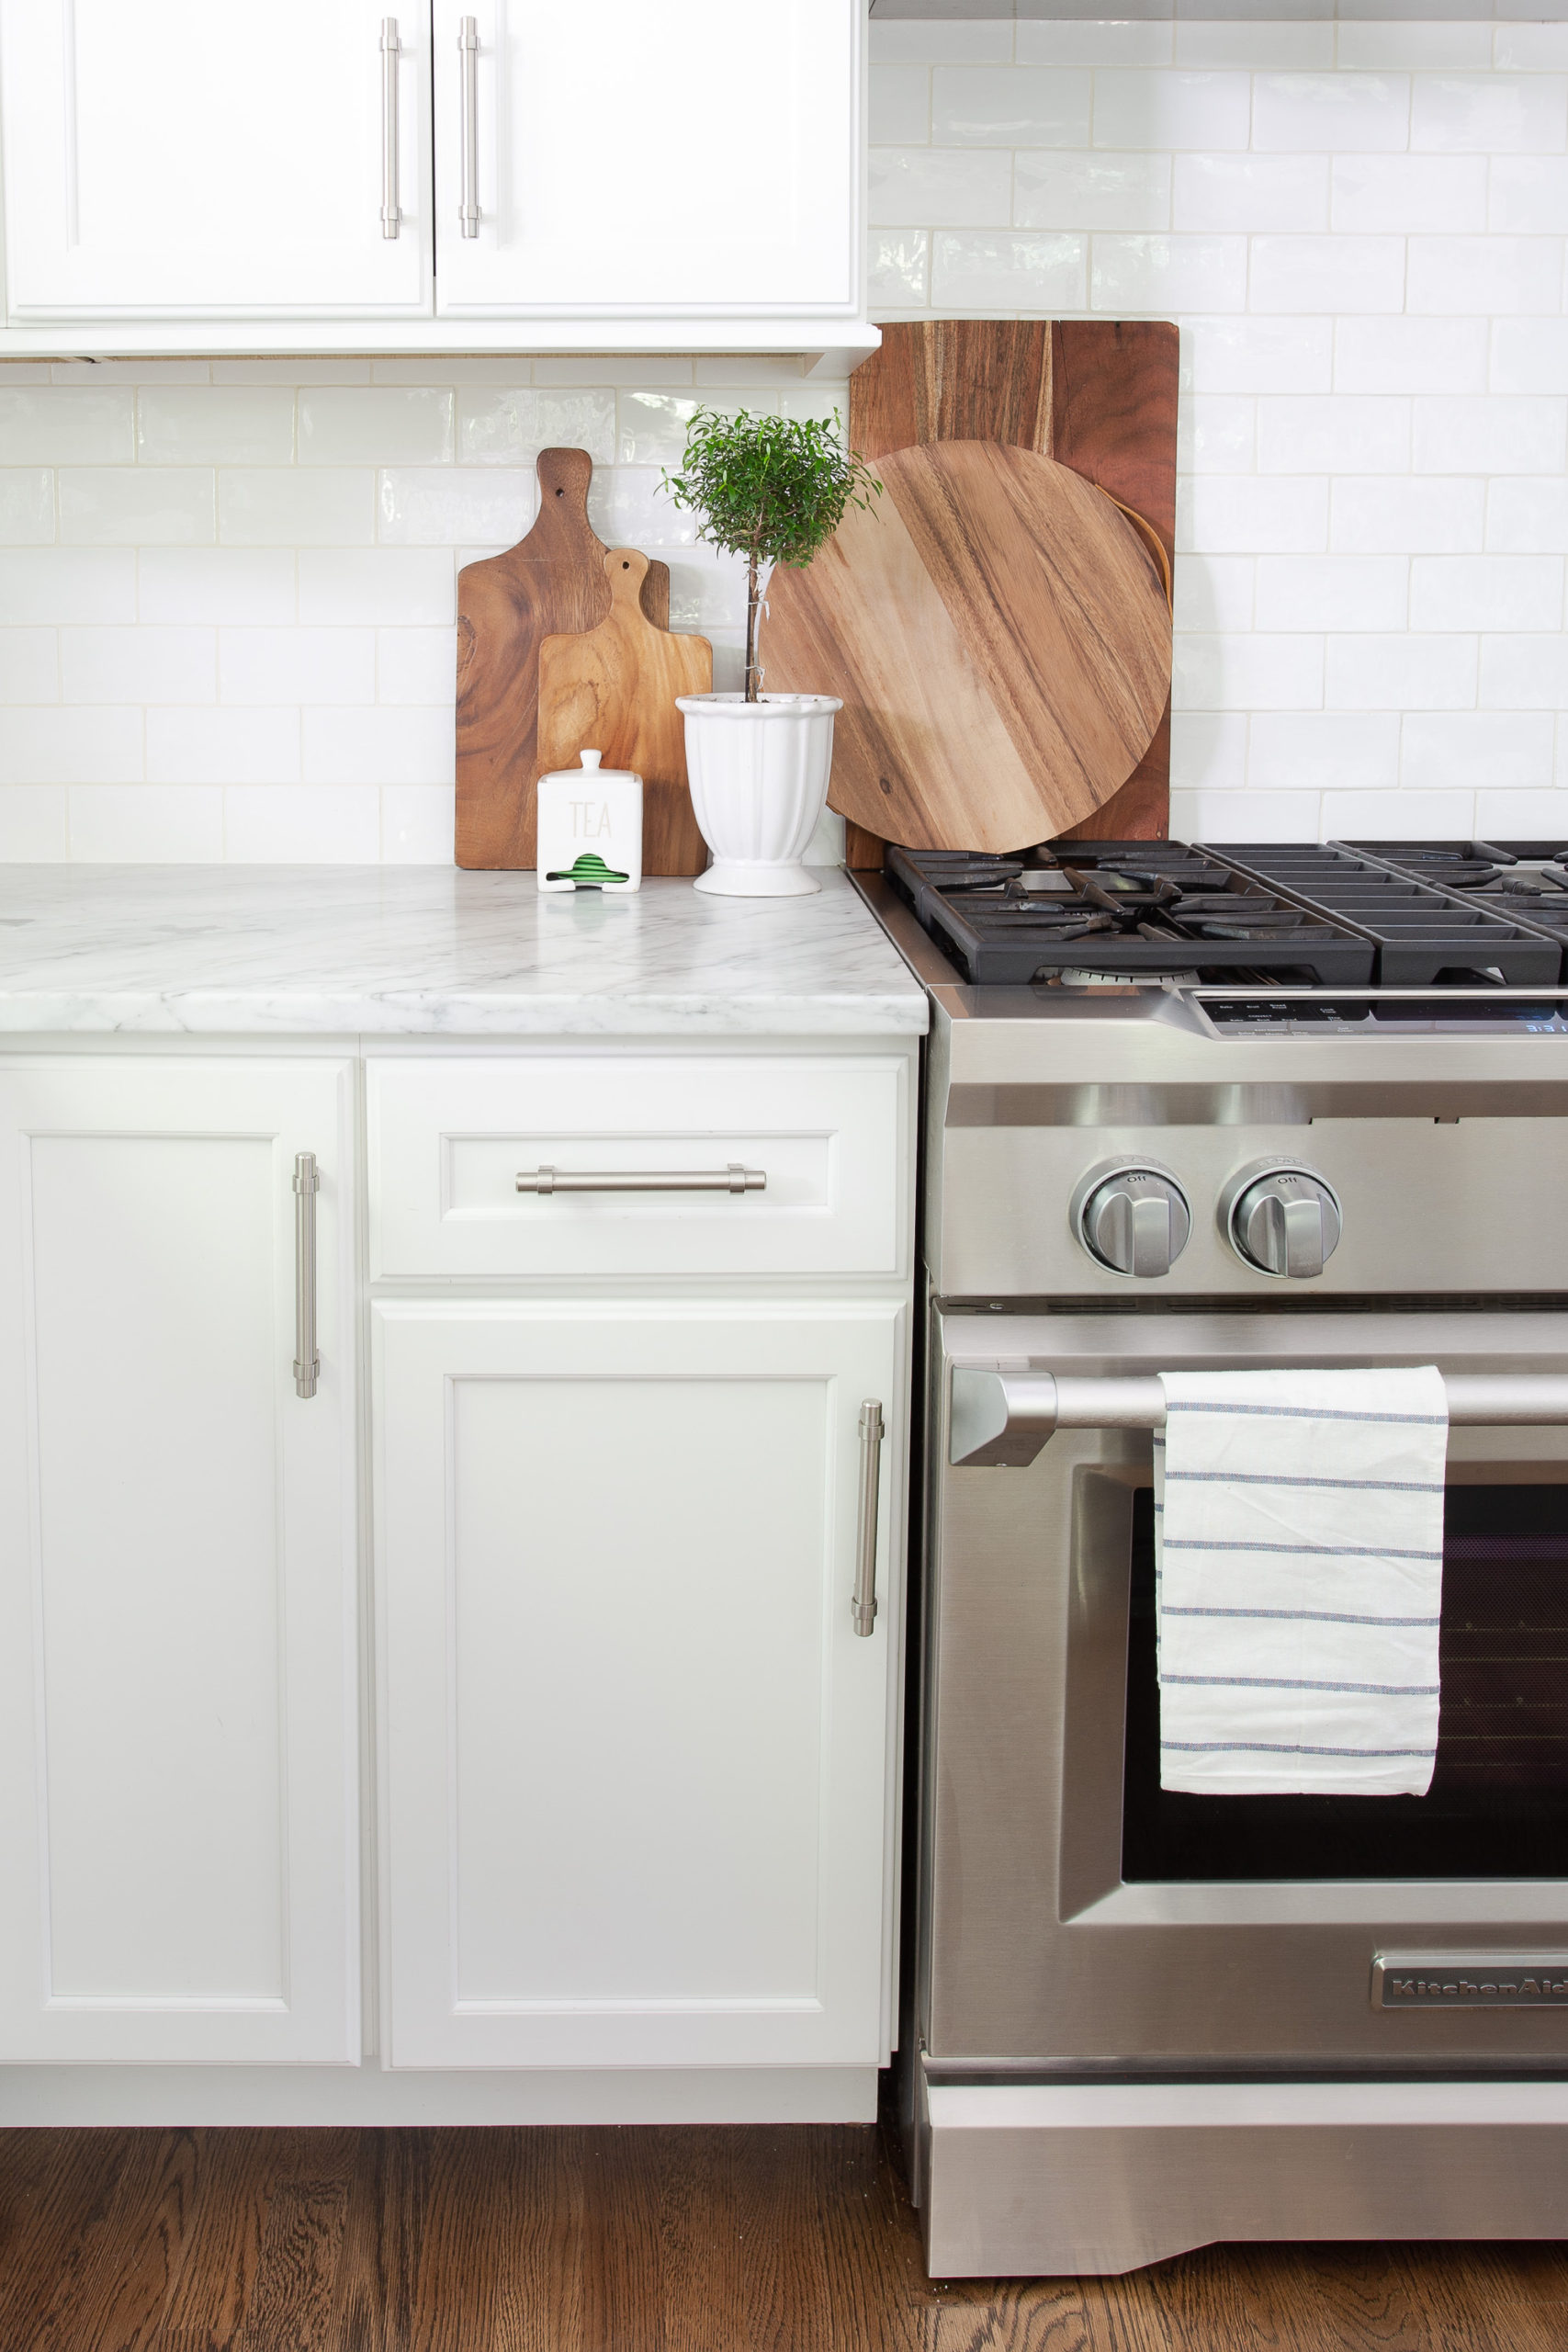 Gas range in white kitchen with towel and wooden trays